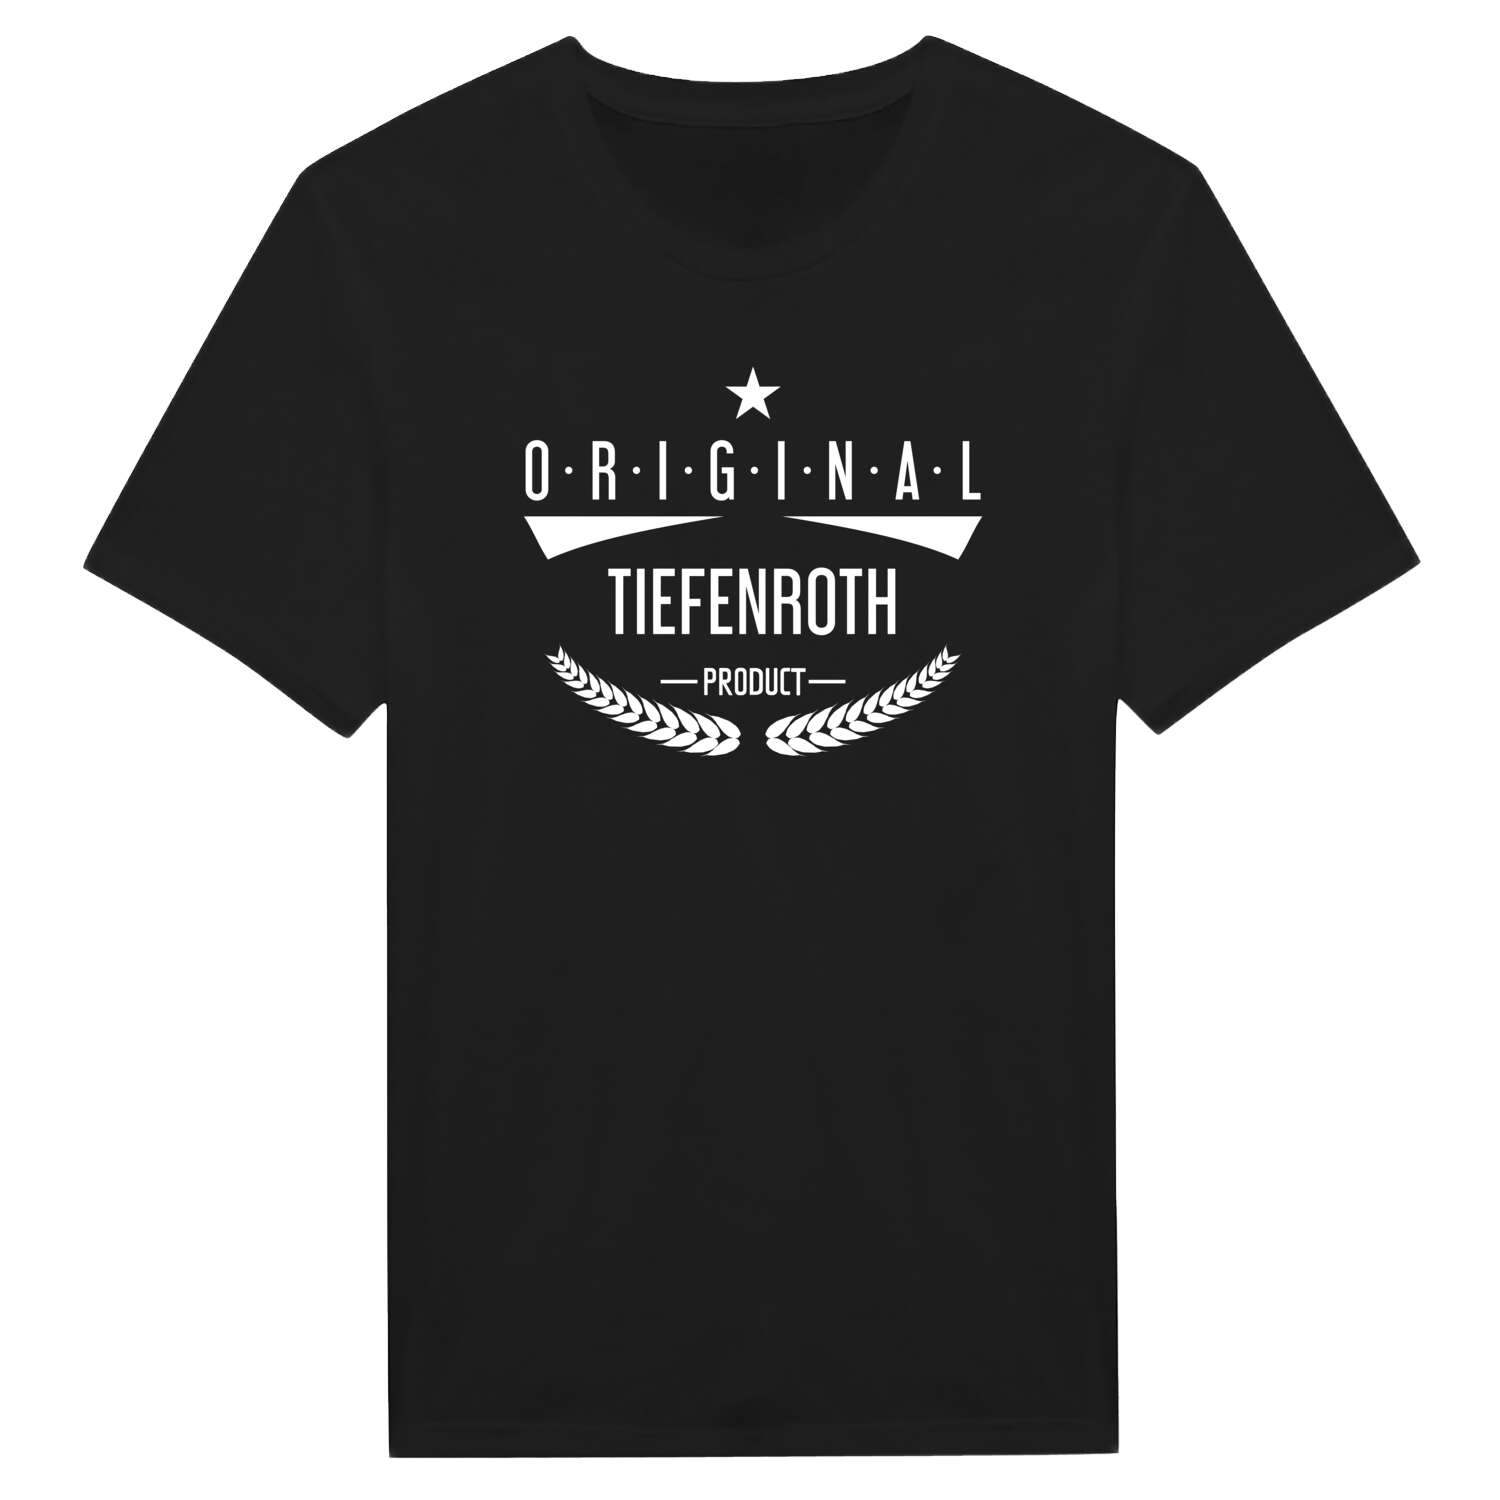 Tiefenroth T-Shirt »Original Product«